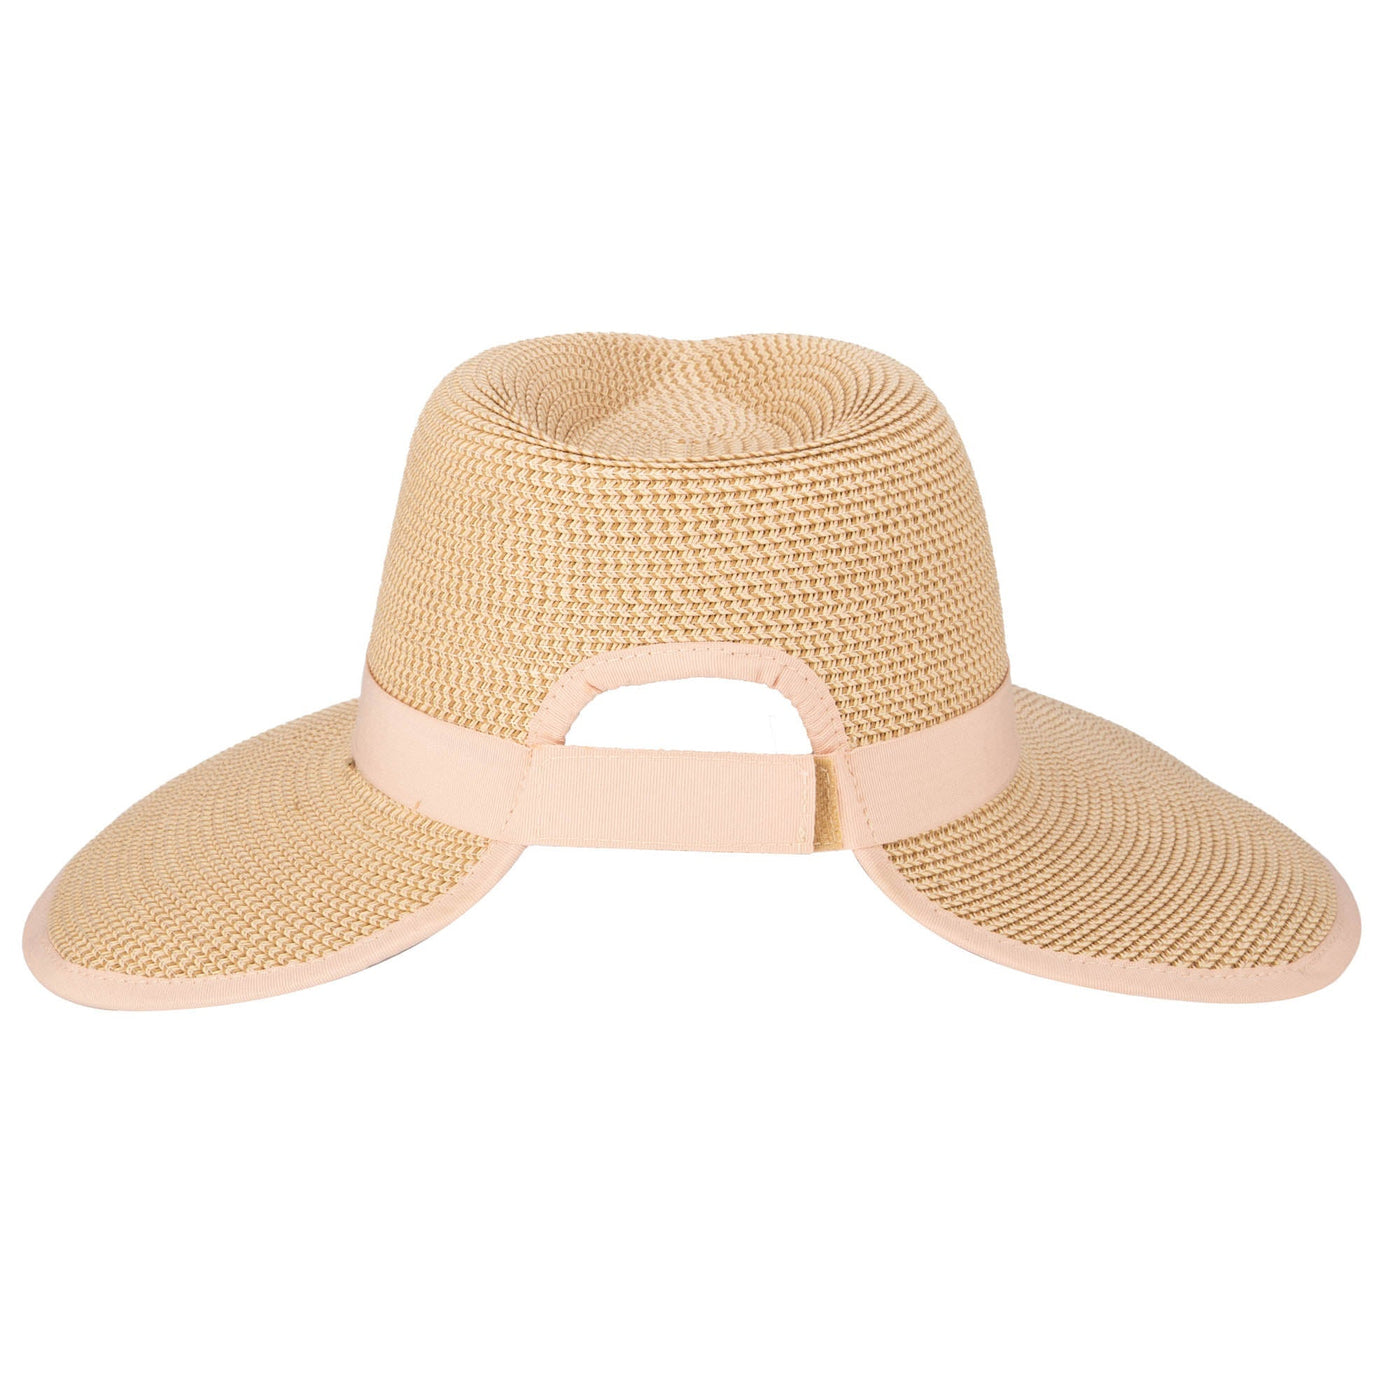 Pinched Face Saver - Women's Pinched Crown Sun Hat